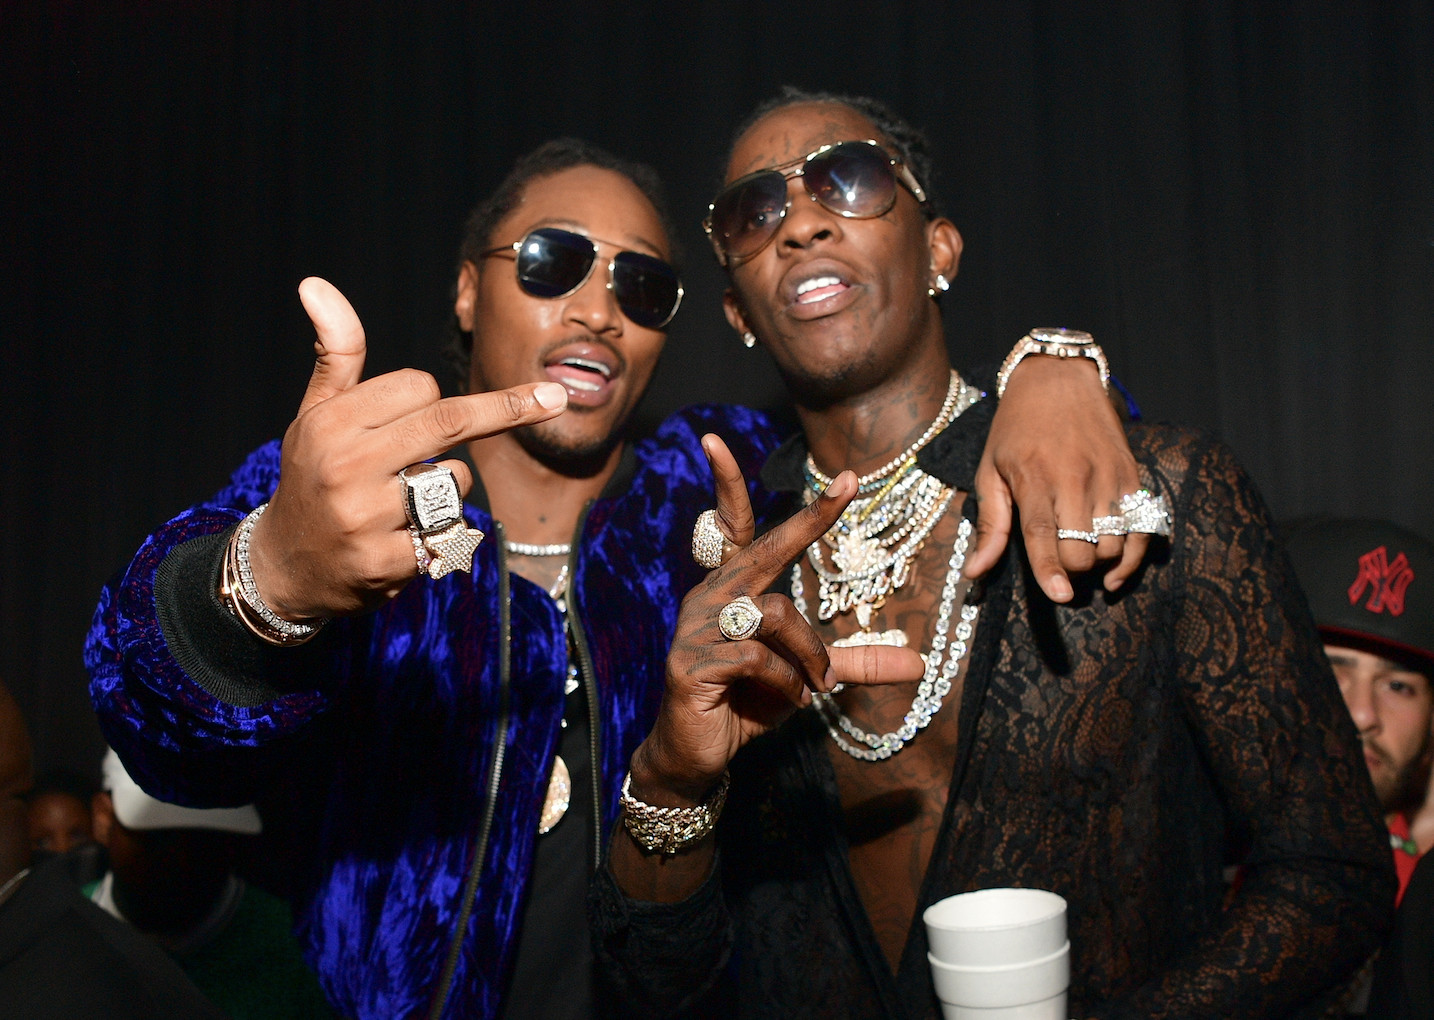 Future On Working With Young Thug & Travis Scott For “High Off Life”